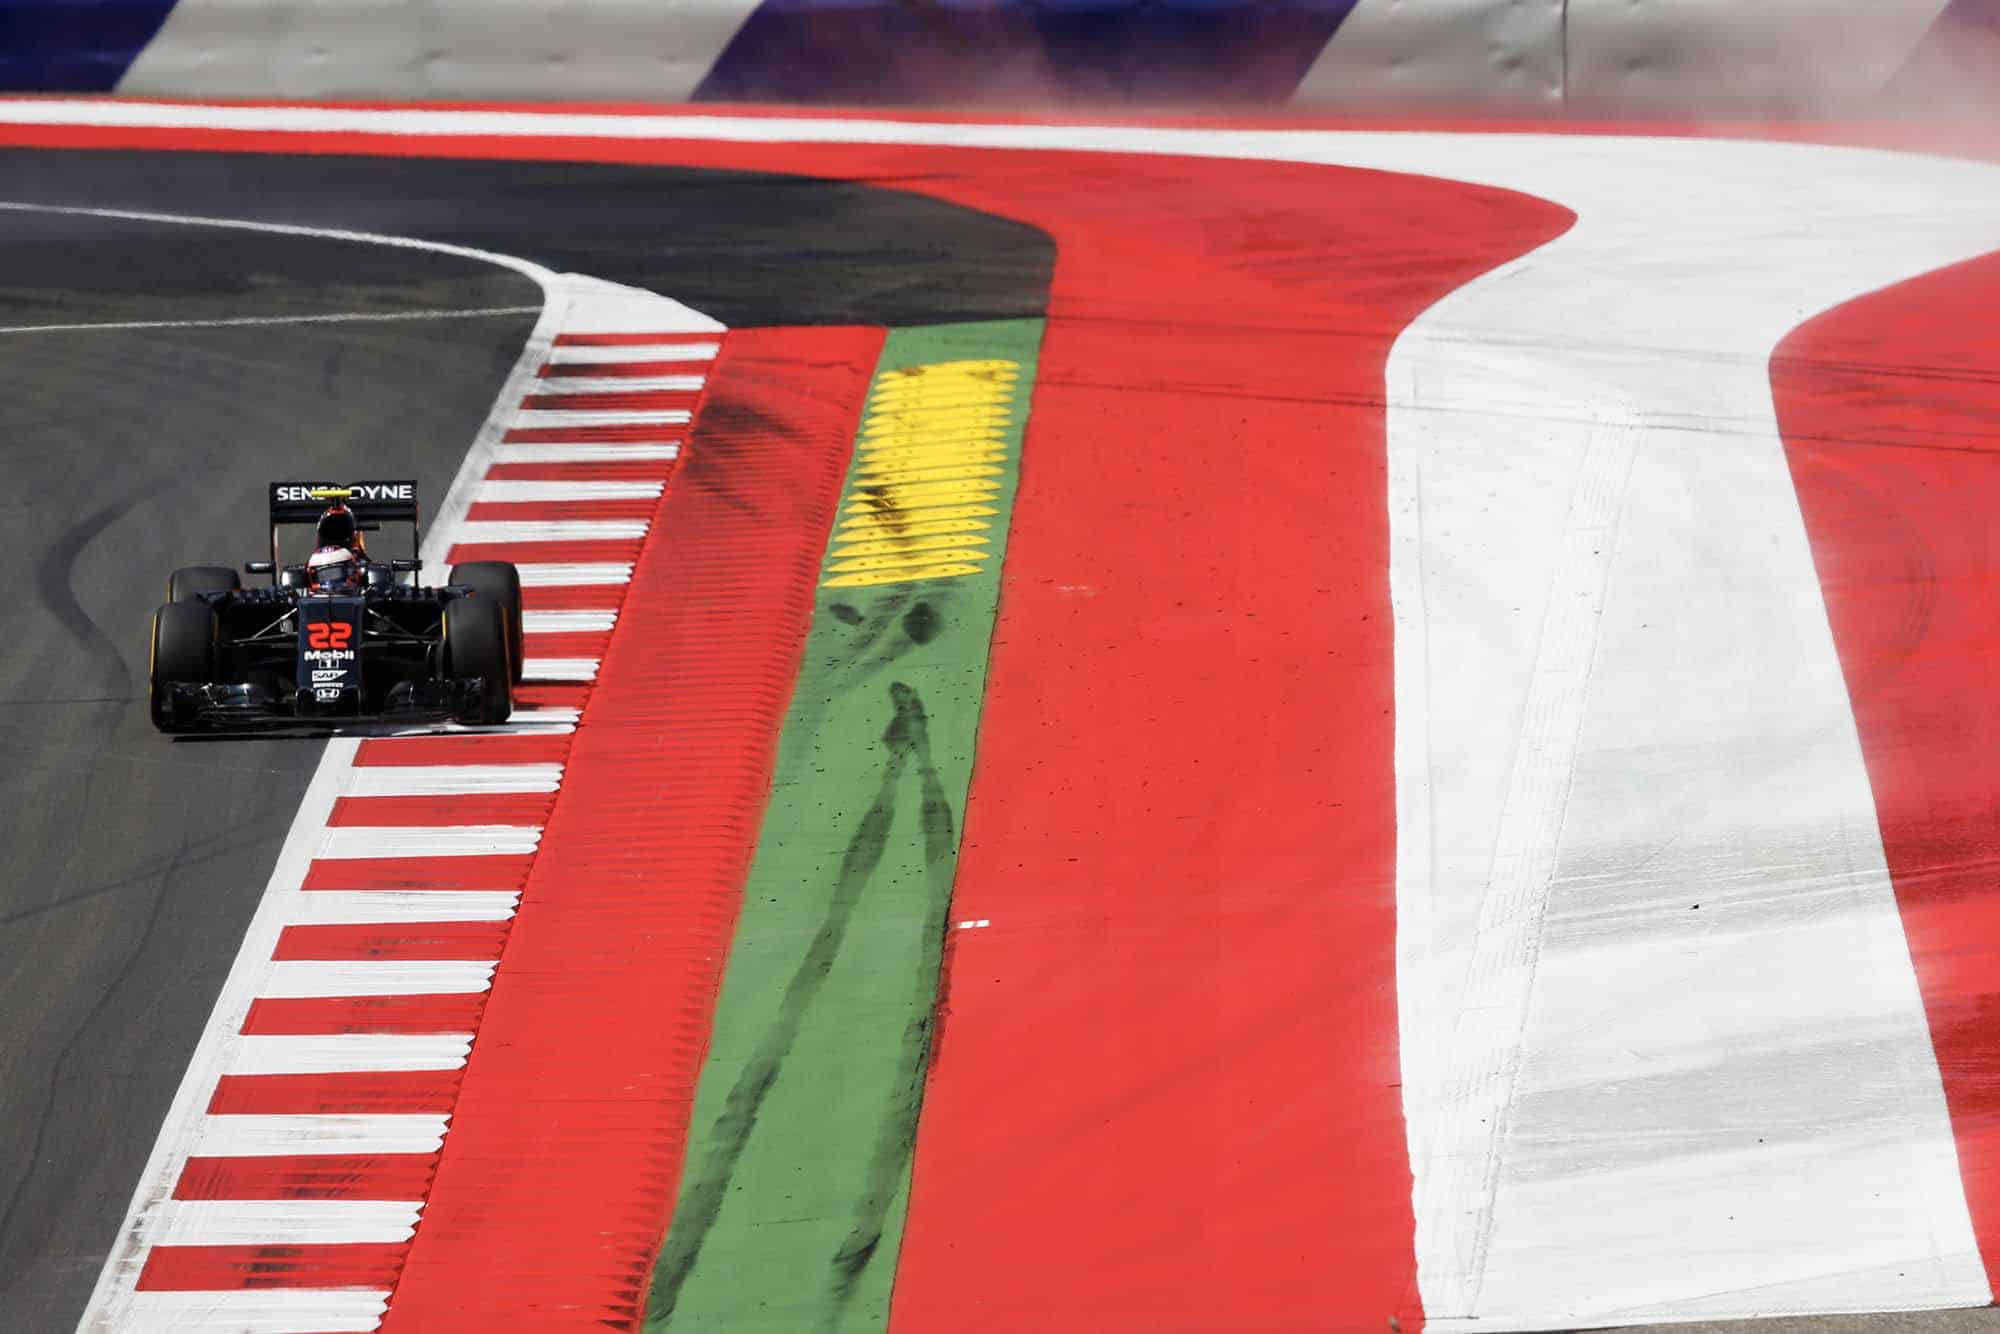 Jenson Button rounds the penultimate corner in his McLaren-Honda during the 2016 Austrian Grand Prix Red Bull Ring